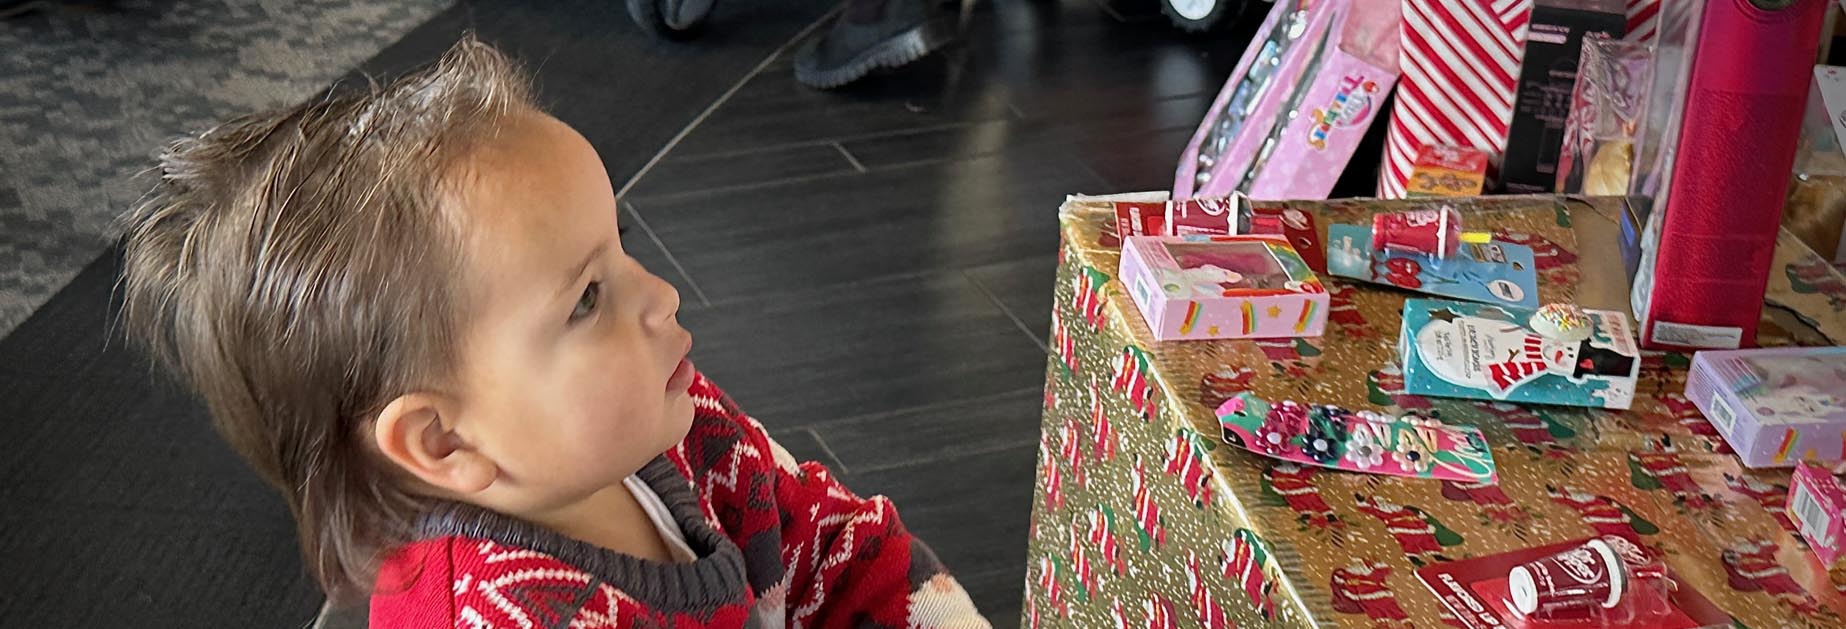 A young child next to wrapped presents